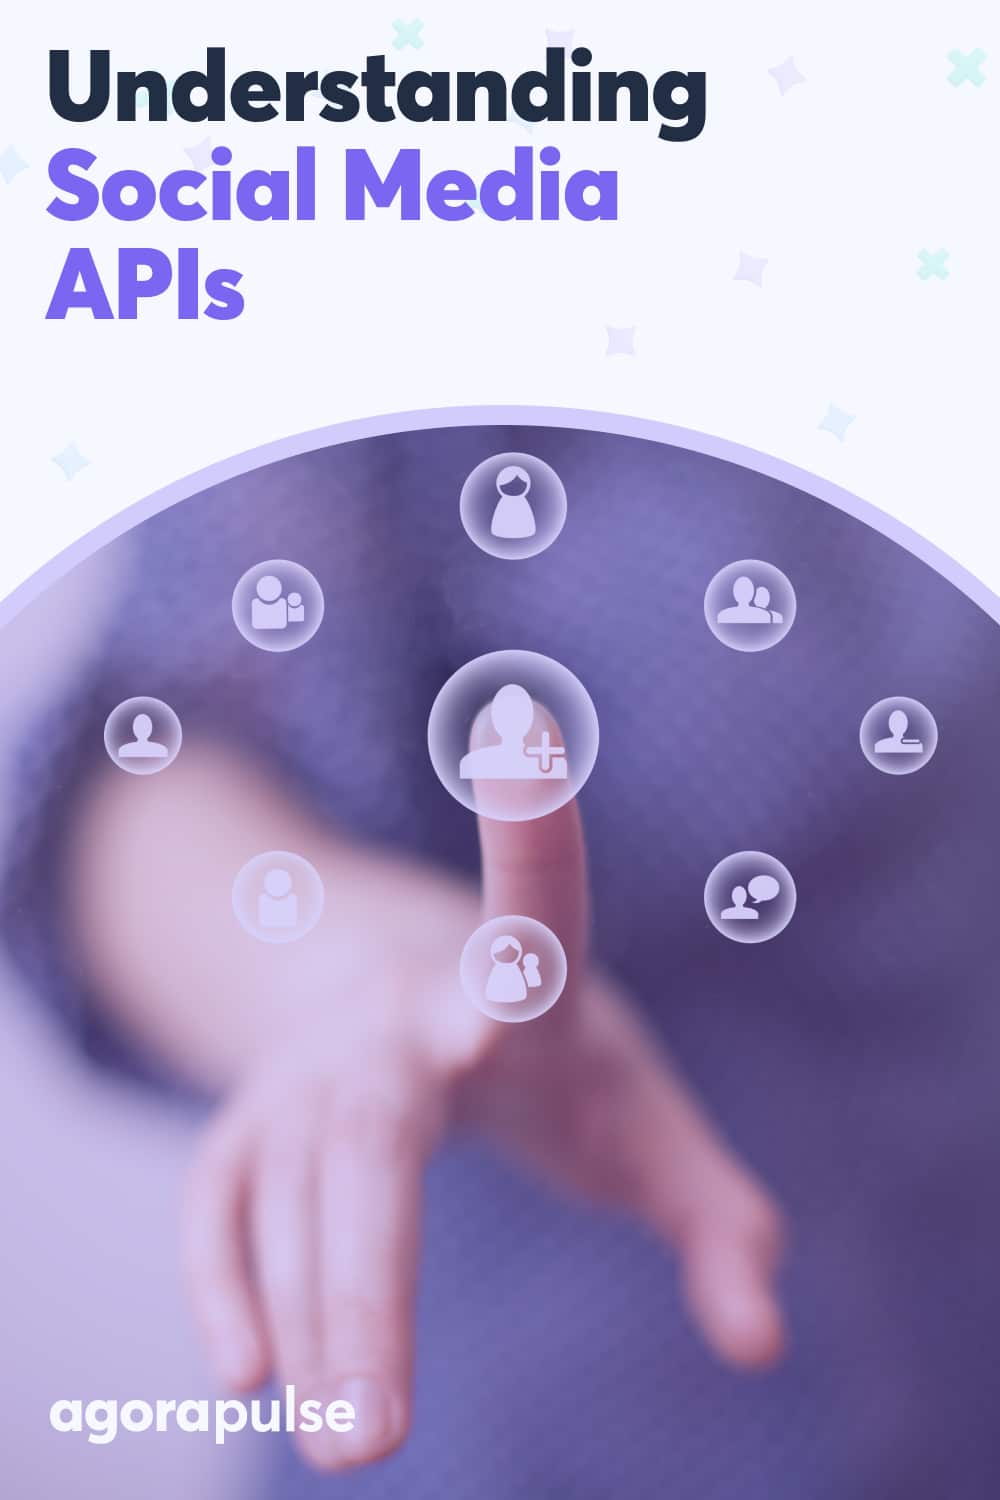 Guide to Social Media APIs for the Non-Technical Social Media Manager